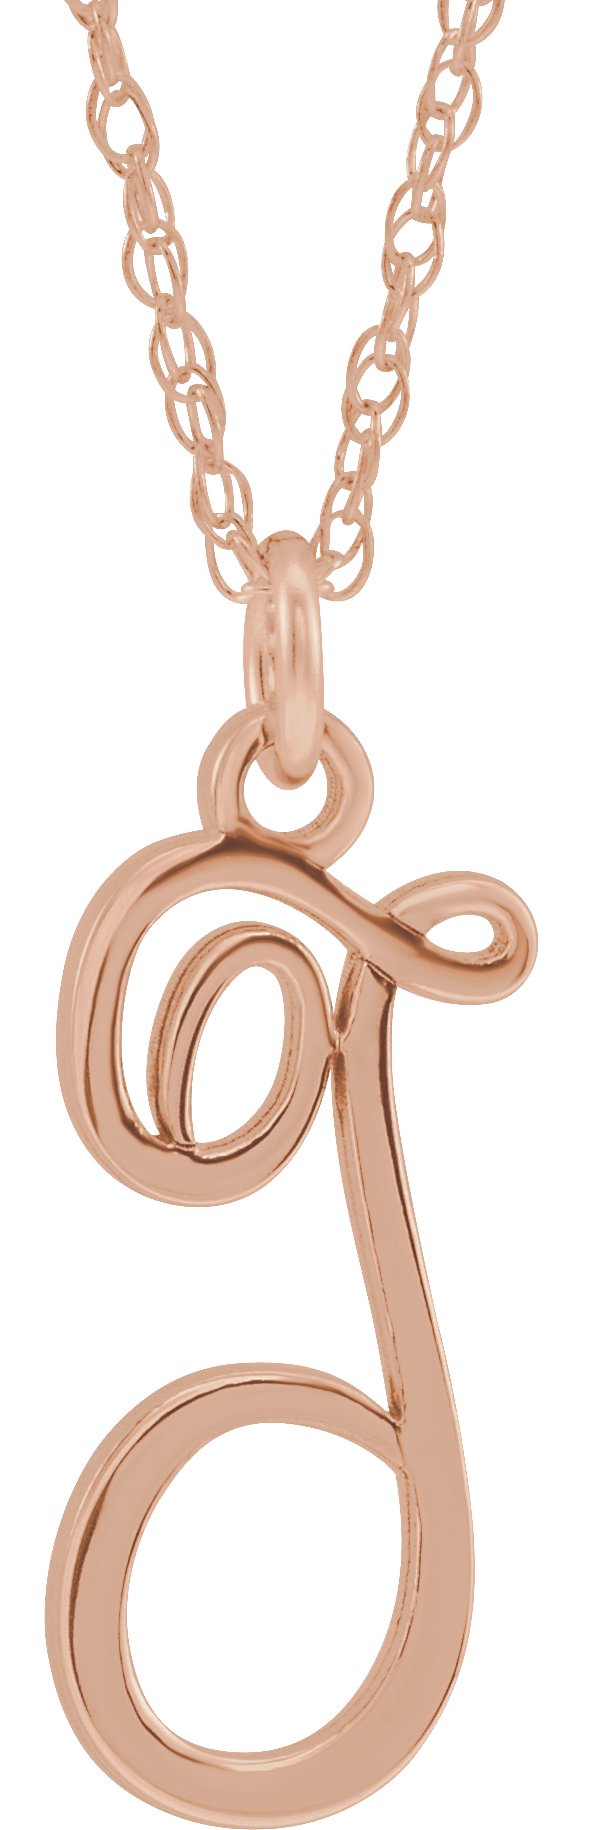 14K Rose Gold-Plated Sterling Silver Script Initial T 16-18" Necklace